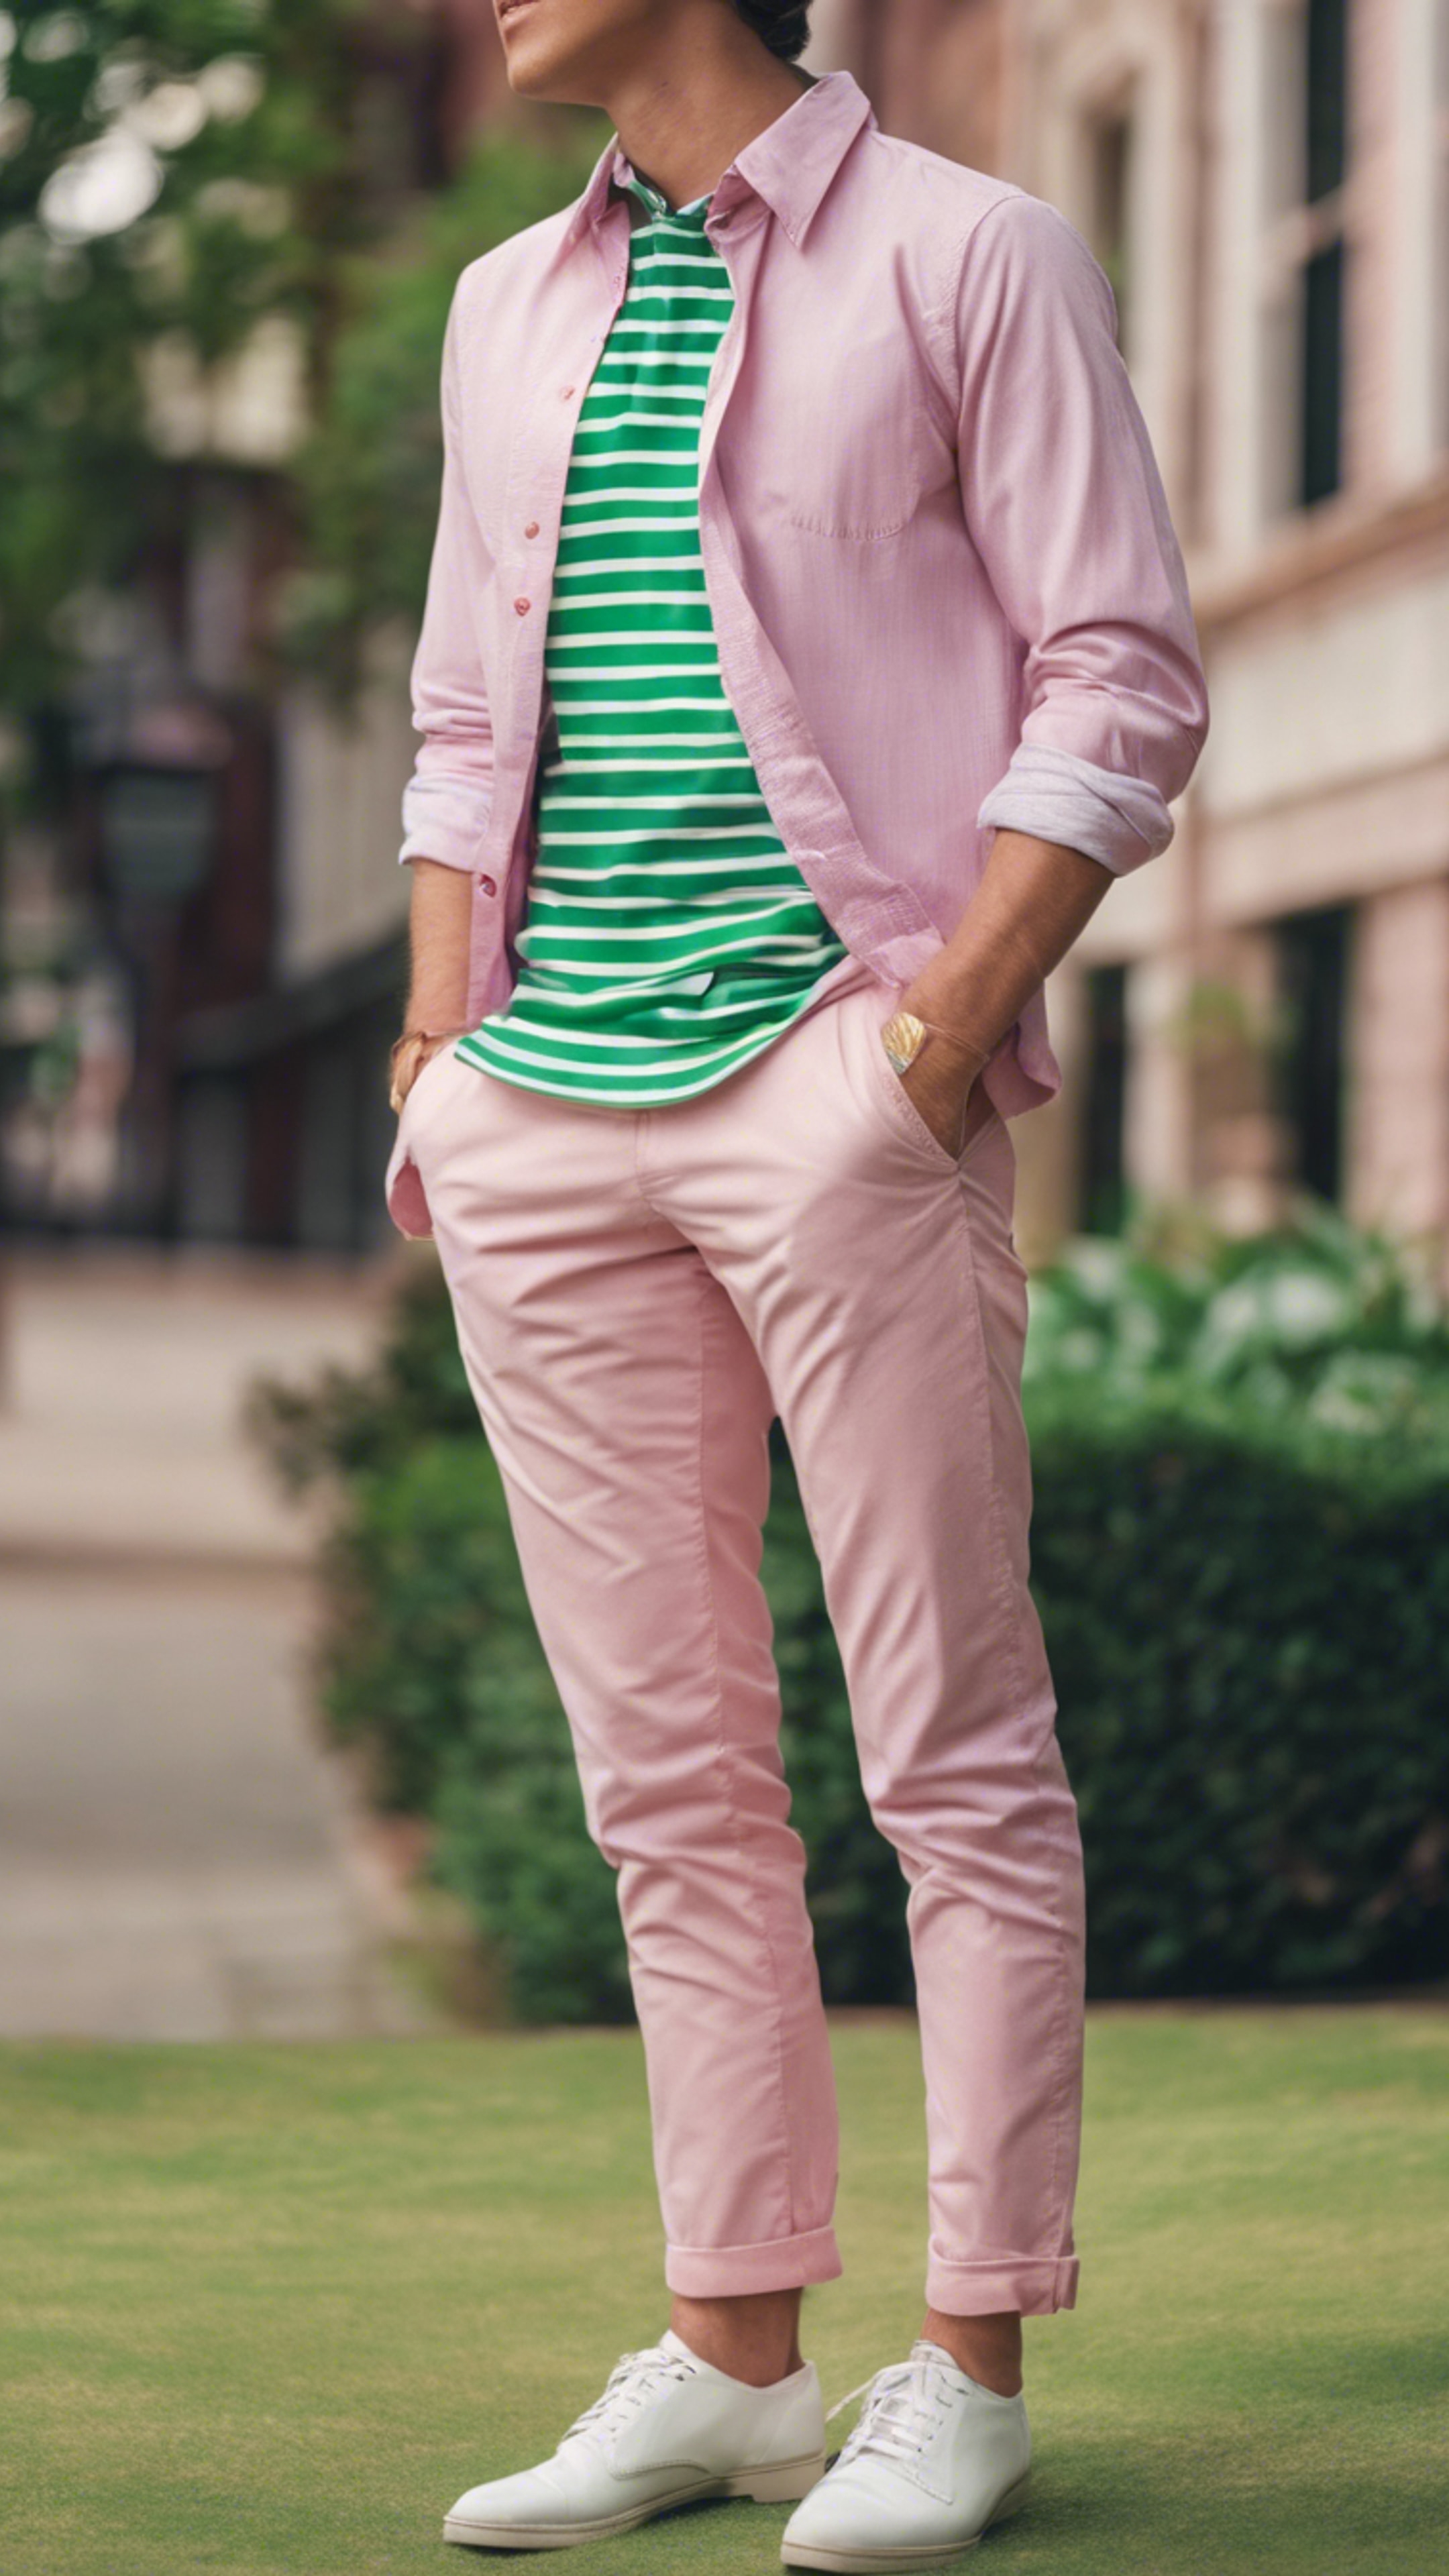 A classic preppy outfit in pink chinos with a green striped Oxford shirt. Tapeta[7b2809c9502f40299443]